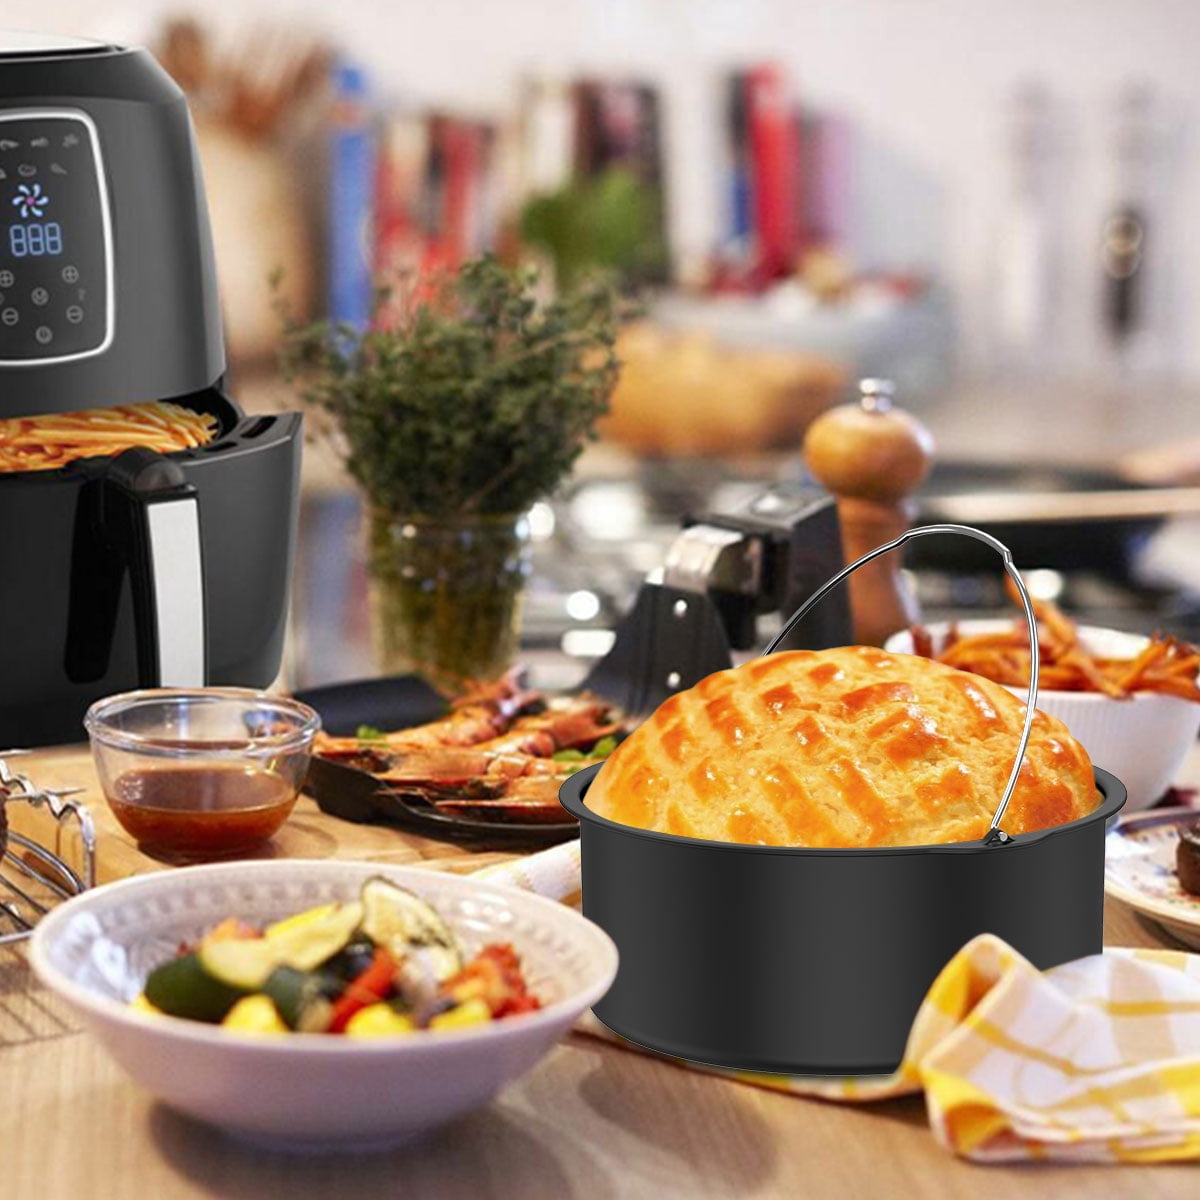 SHANNA 14Pcs 7'' Air Fryer Accessories Set Pizza Pan Chips Baking For  Philips 3.7-6.8QT 